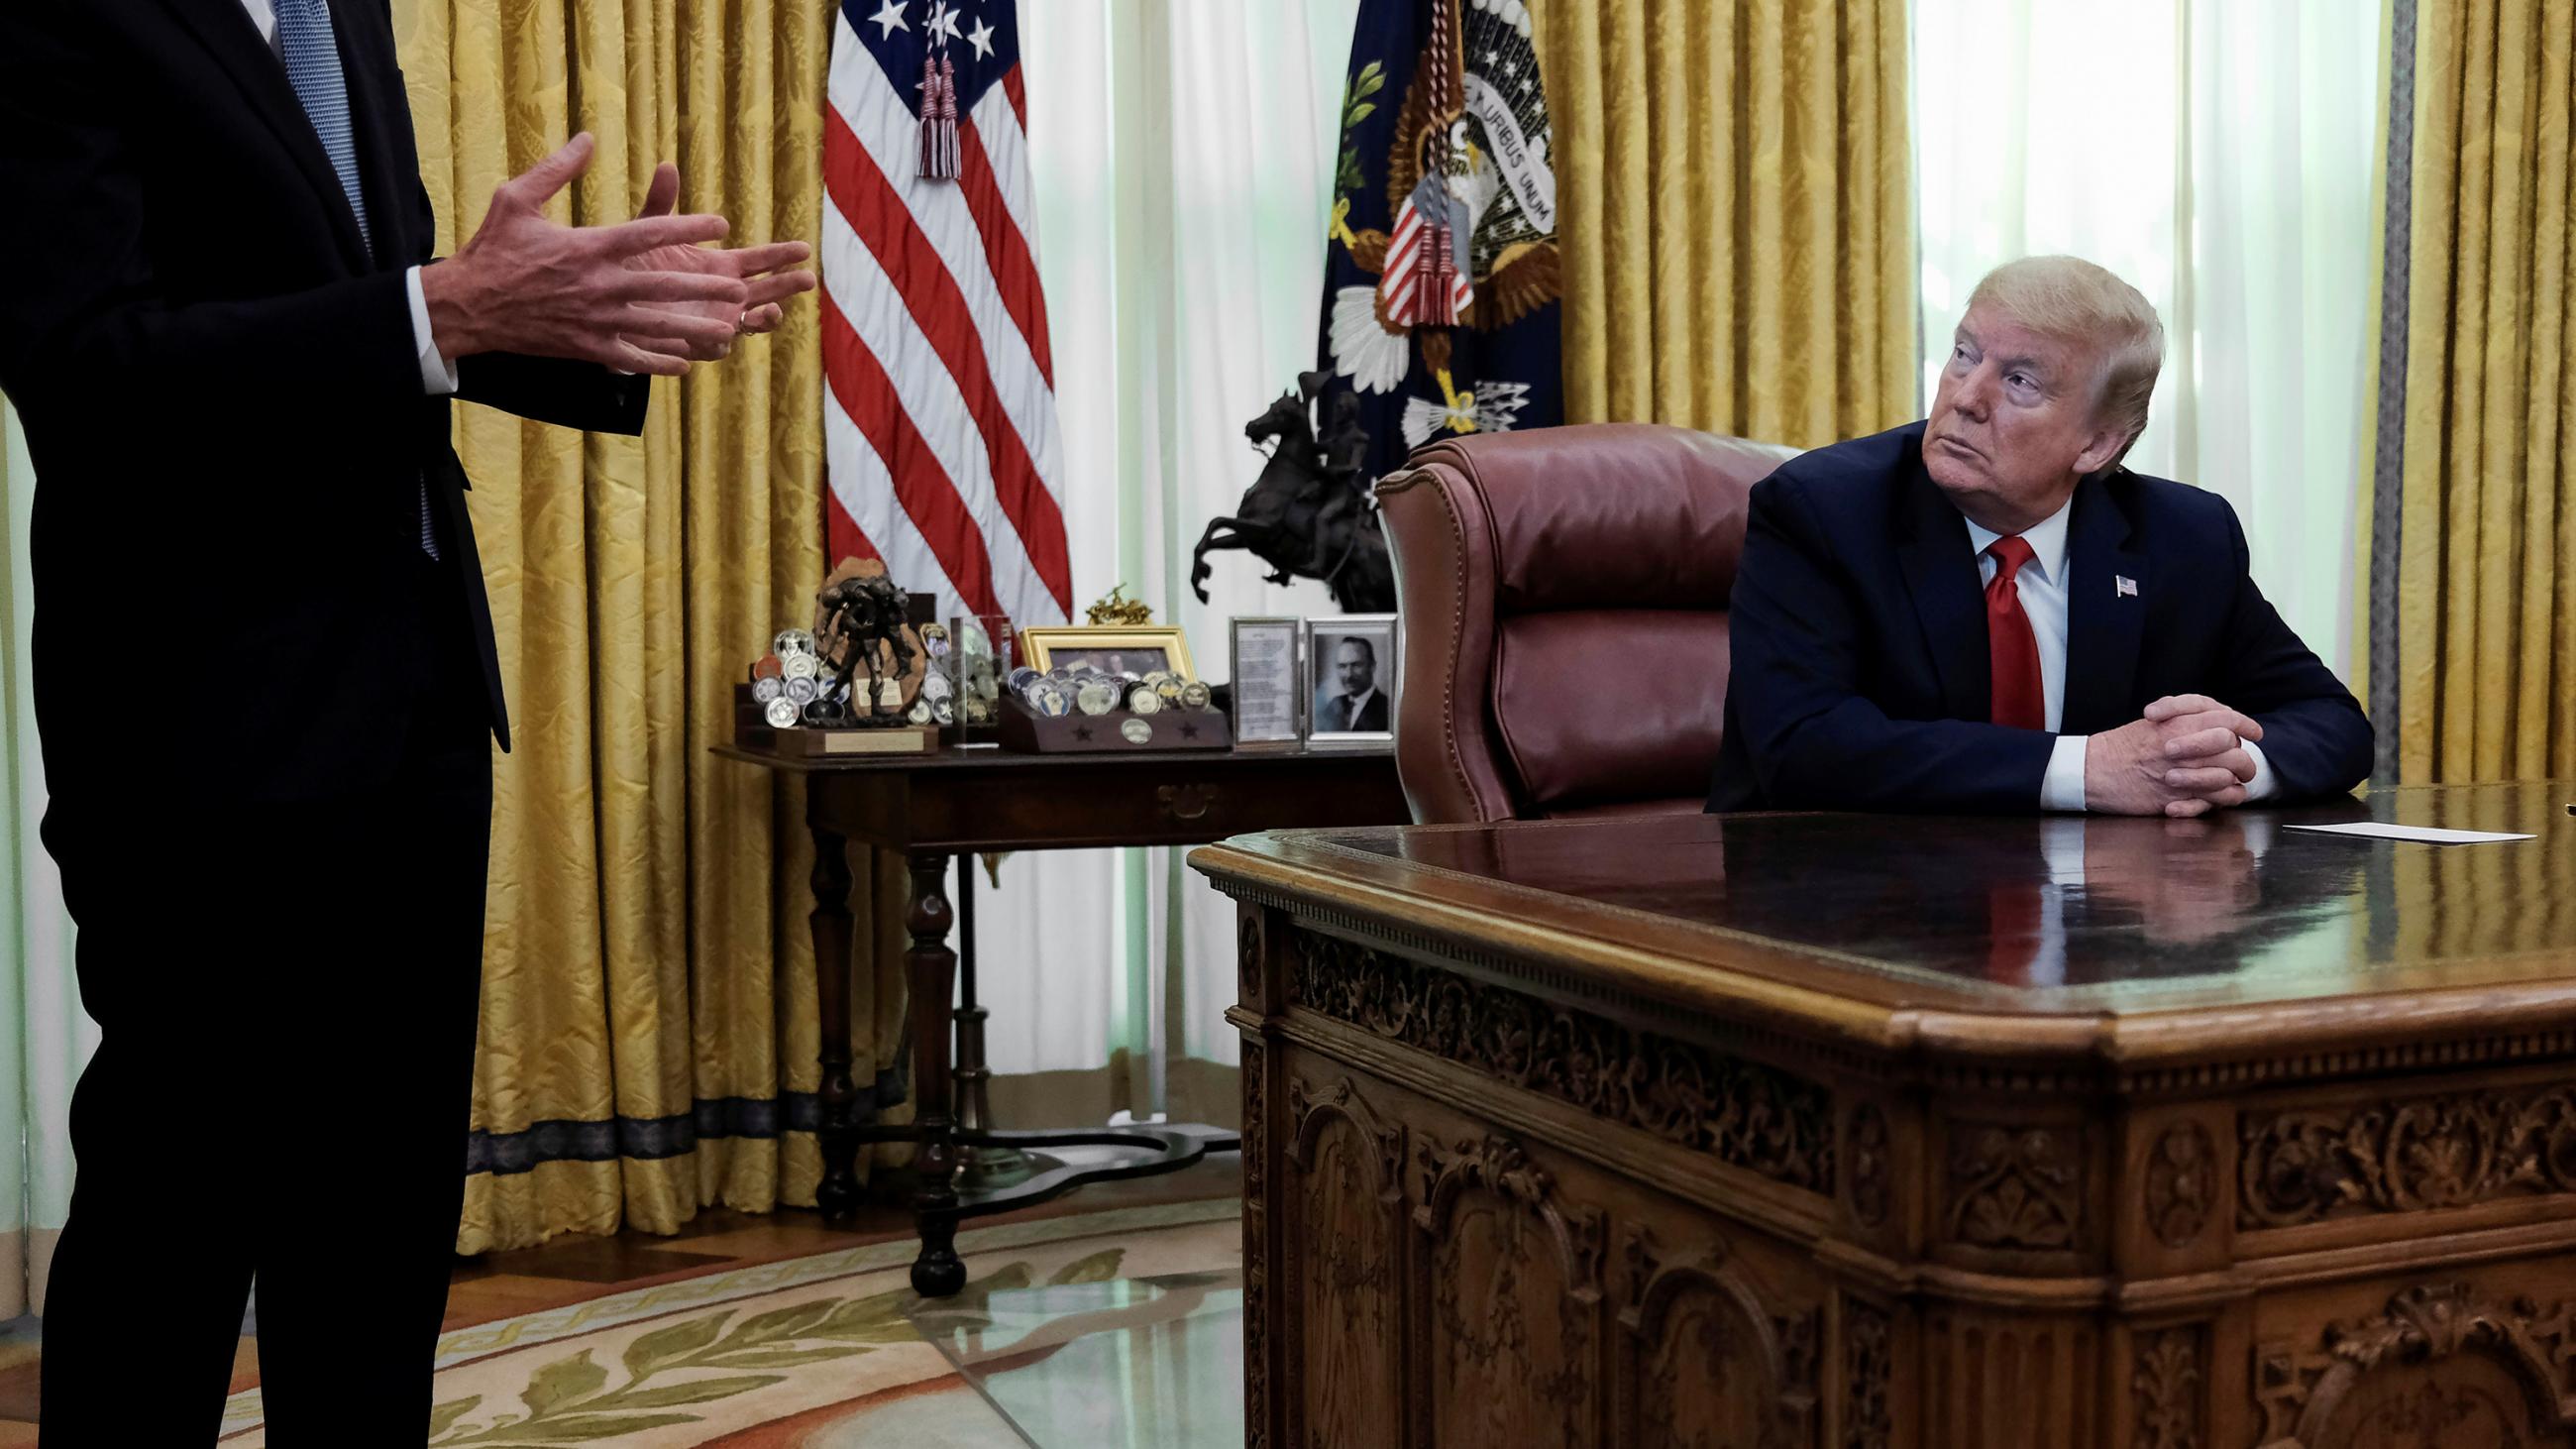 The photo shows the president at his desk looking to the right as an suited man speaks. 